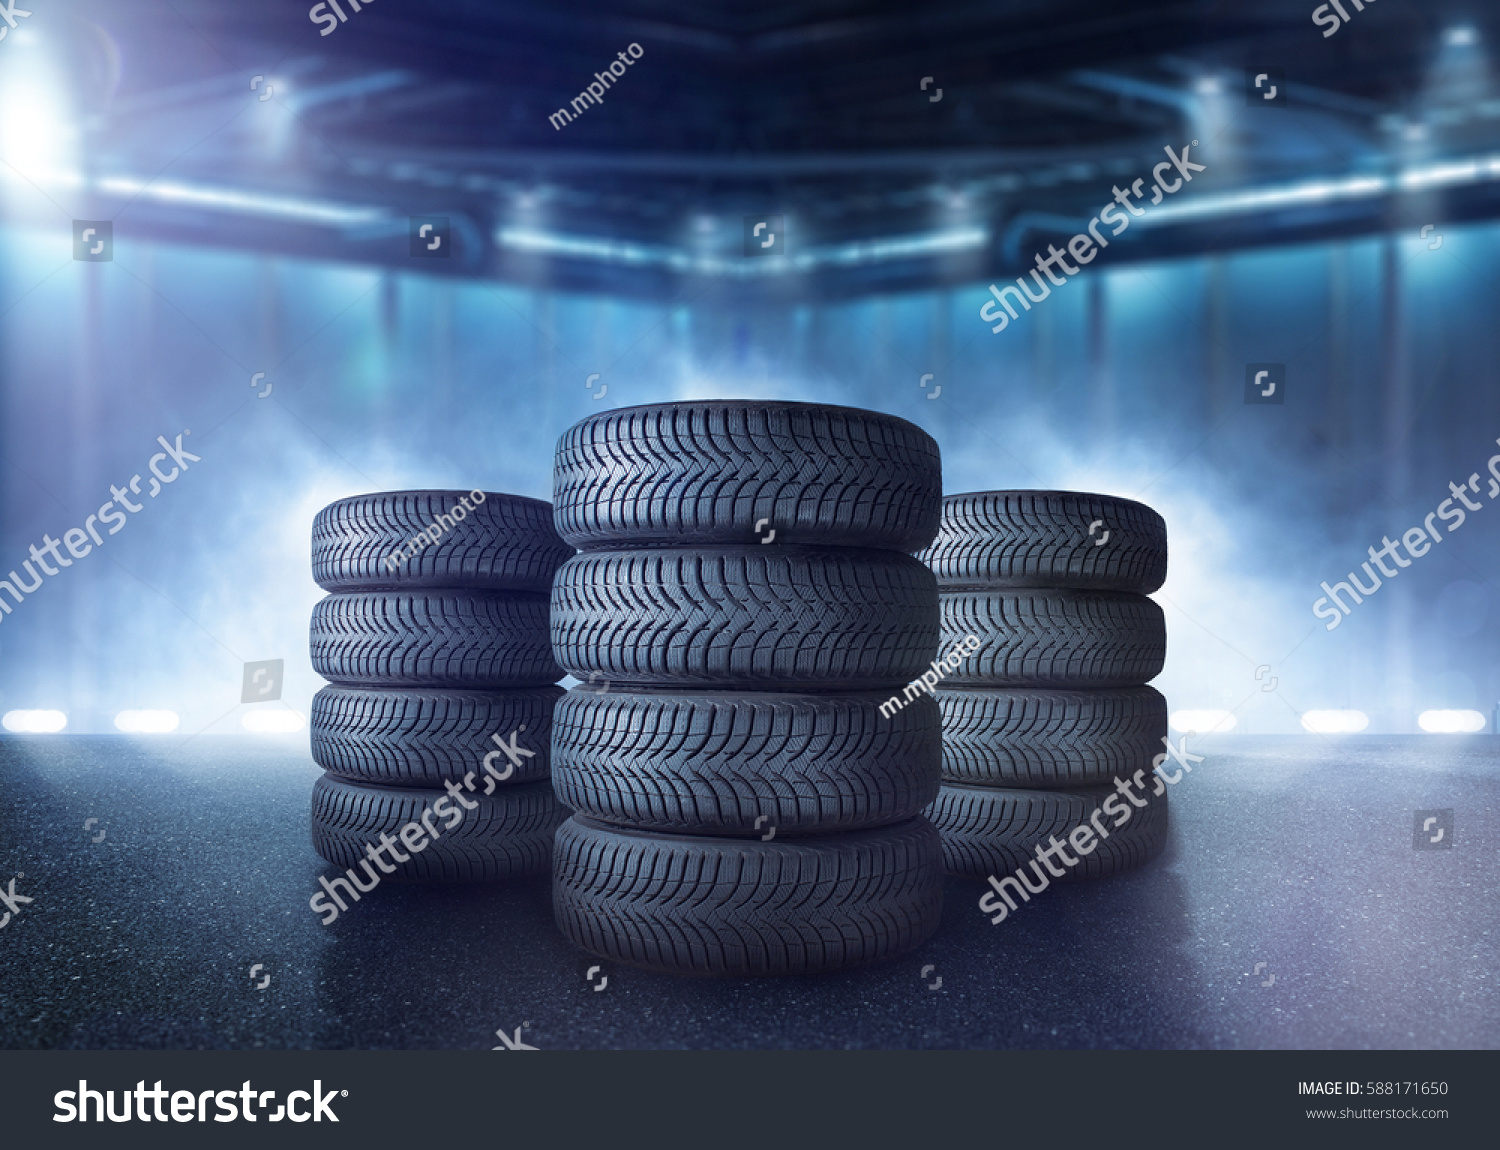 Tires are stacked in a warehouse #588171650